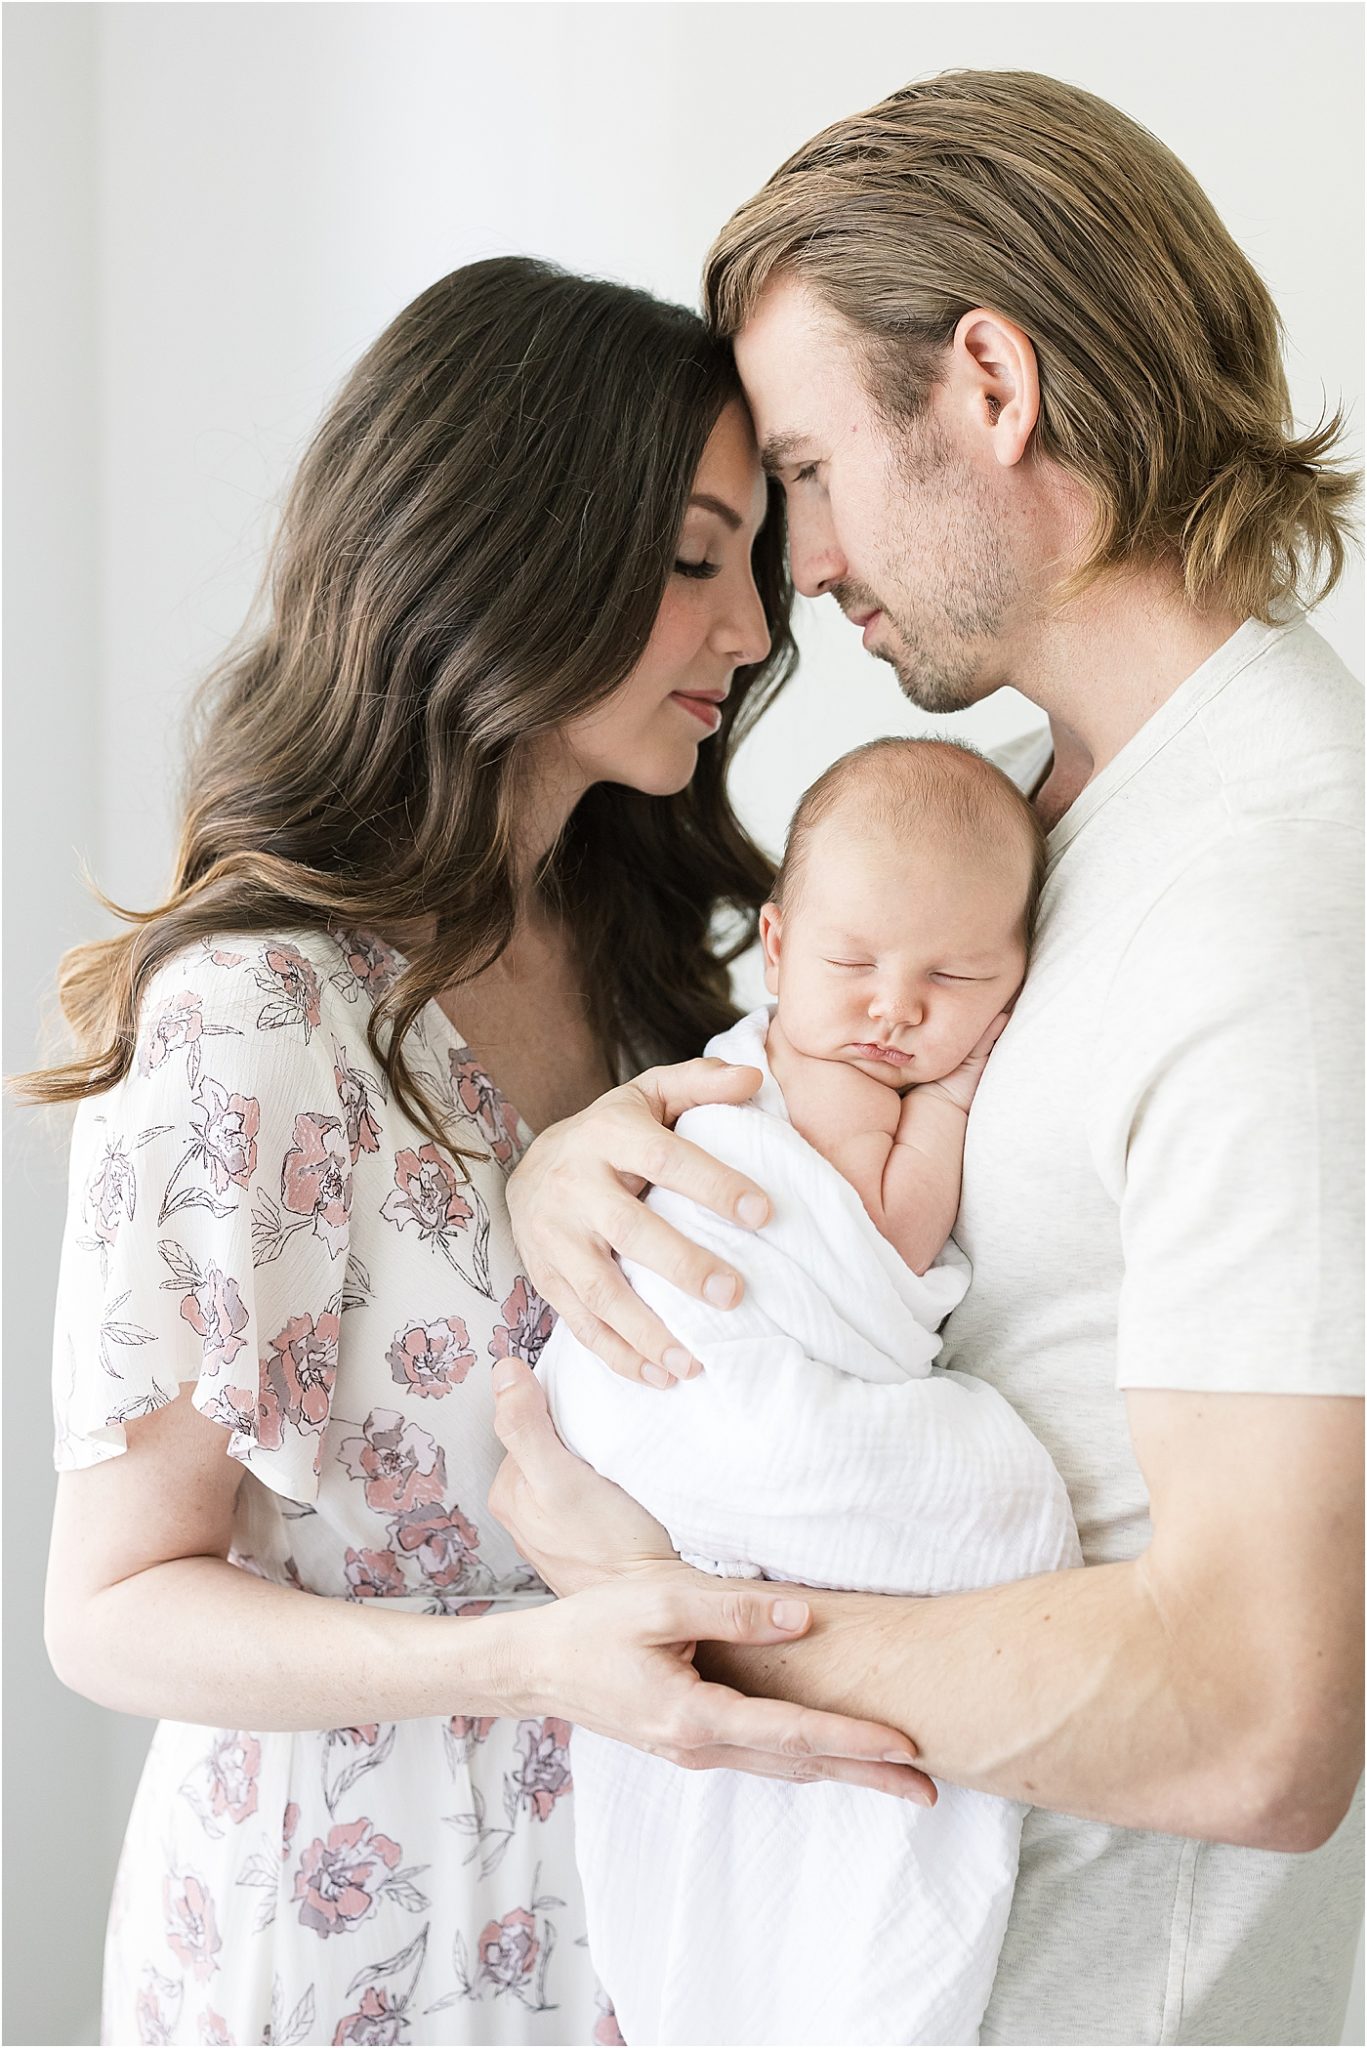 Mom and Dad sharing a sweet moment holding their son during newborn photos with Lindsay Konopa Photography.